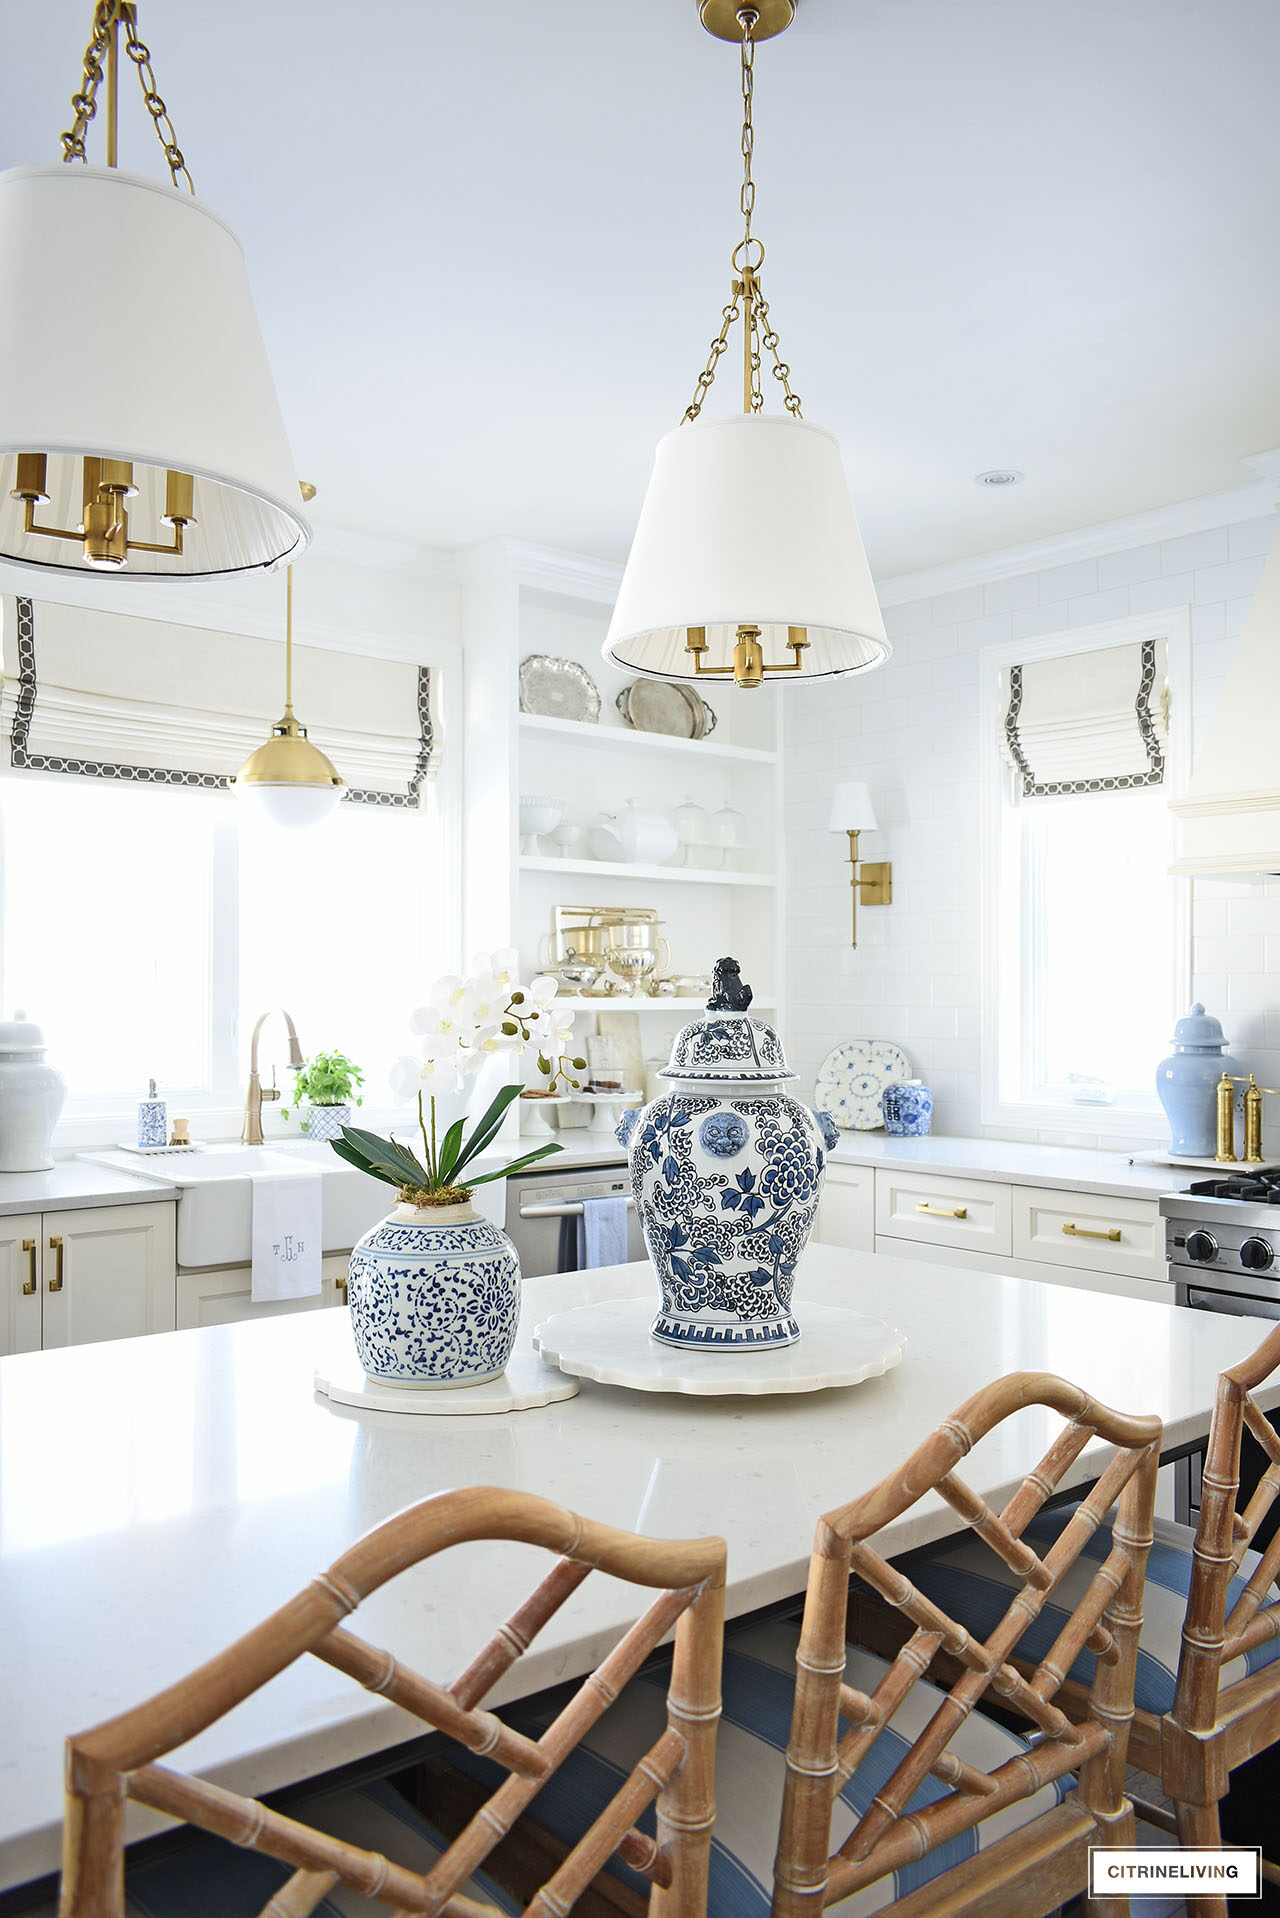 White kitchen decorated for spring with blue and white ginger jars and an elegant orchid arrangement.